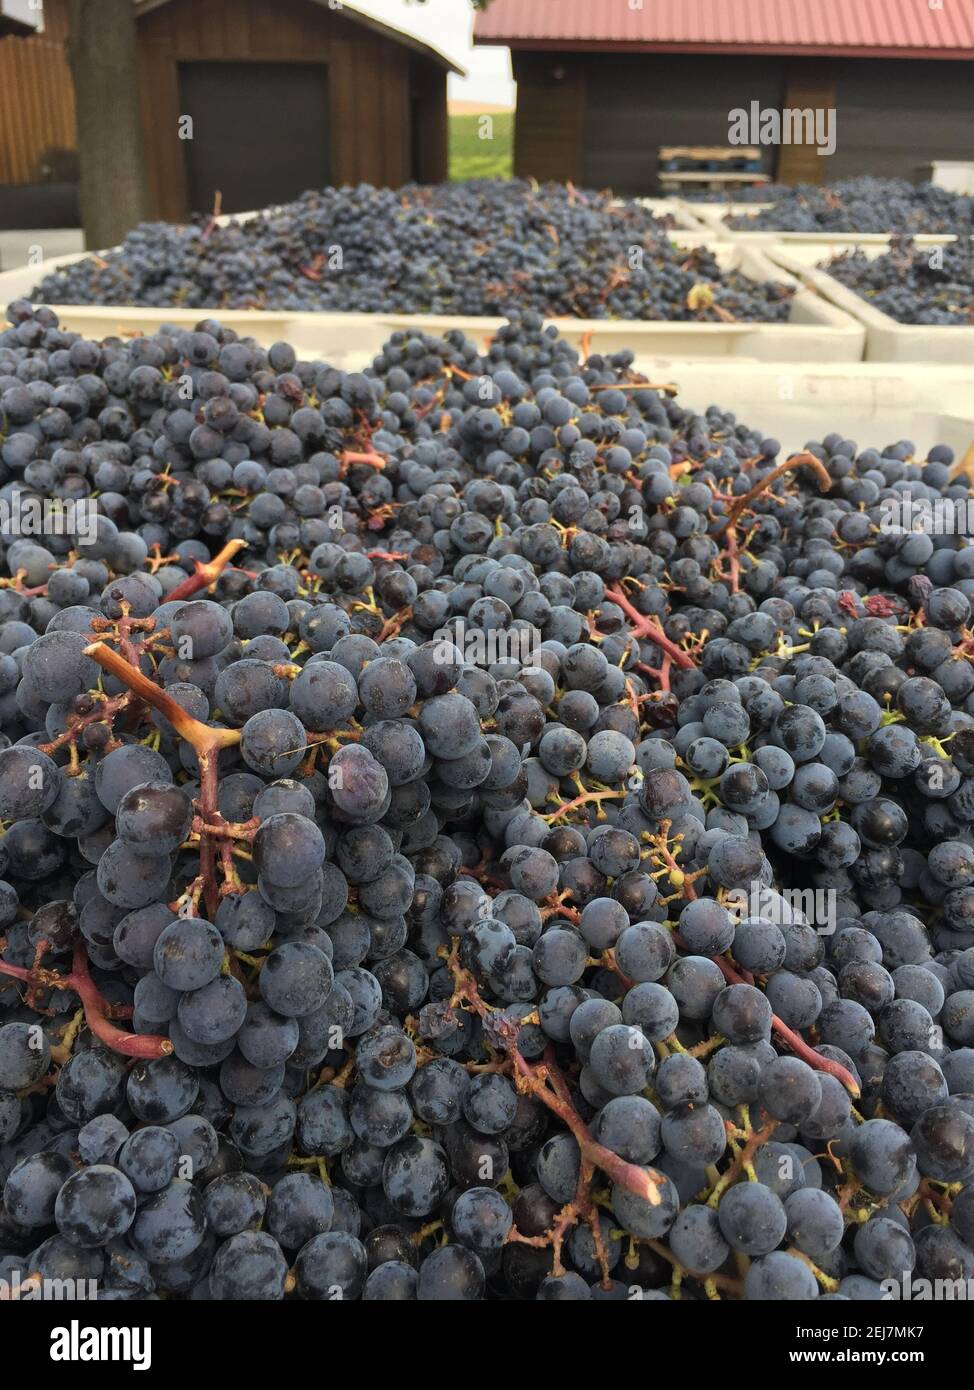 Vertical shot of harvested grape clusters in bins ready for production of red wine Stock Photo